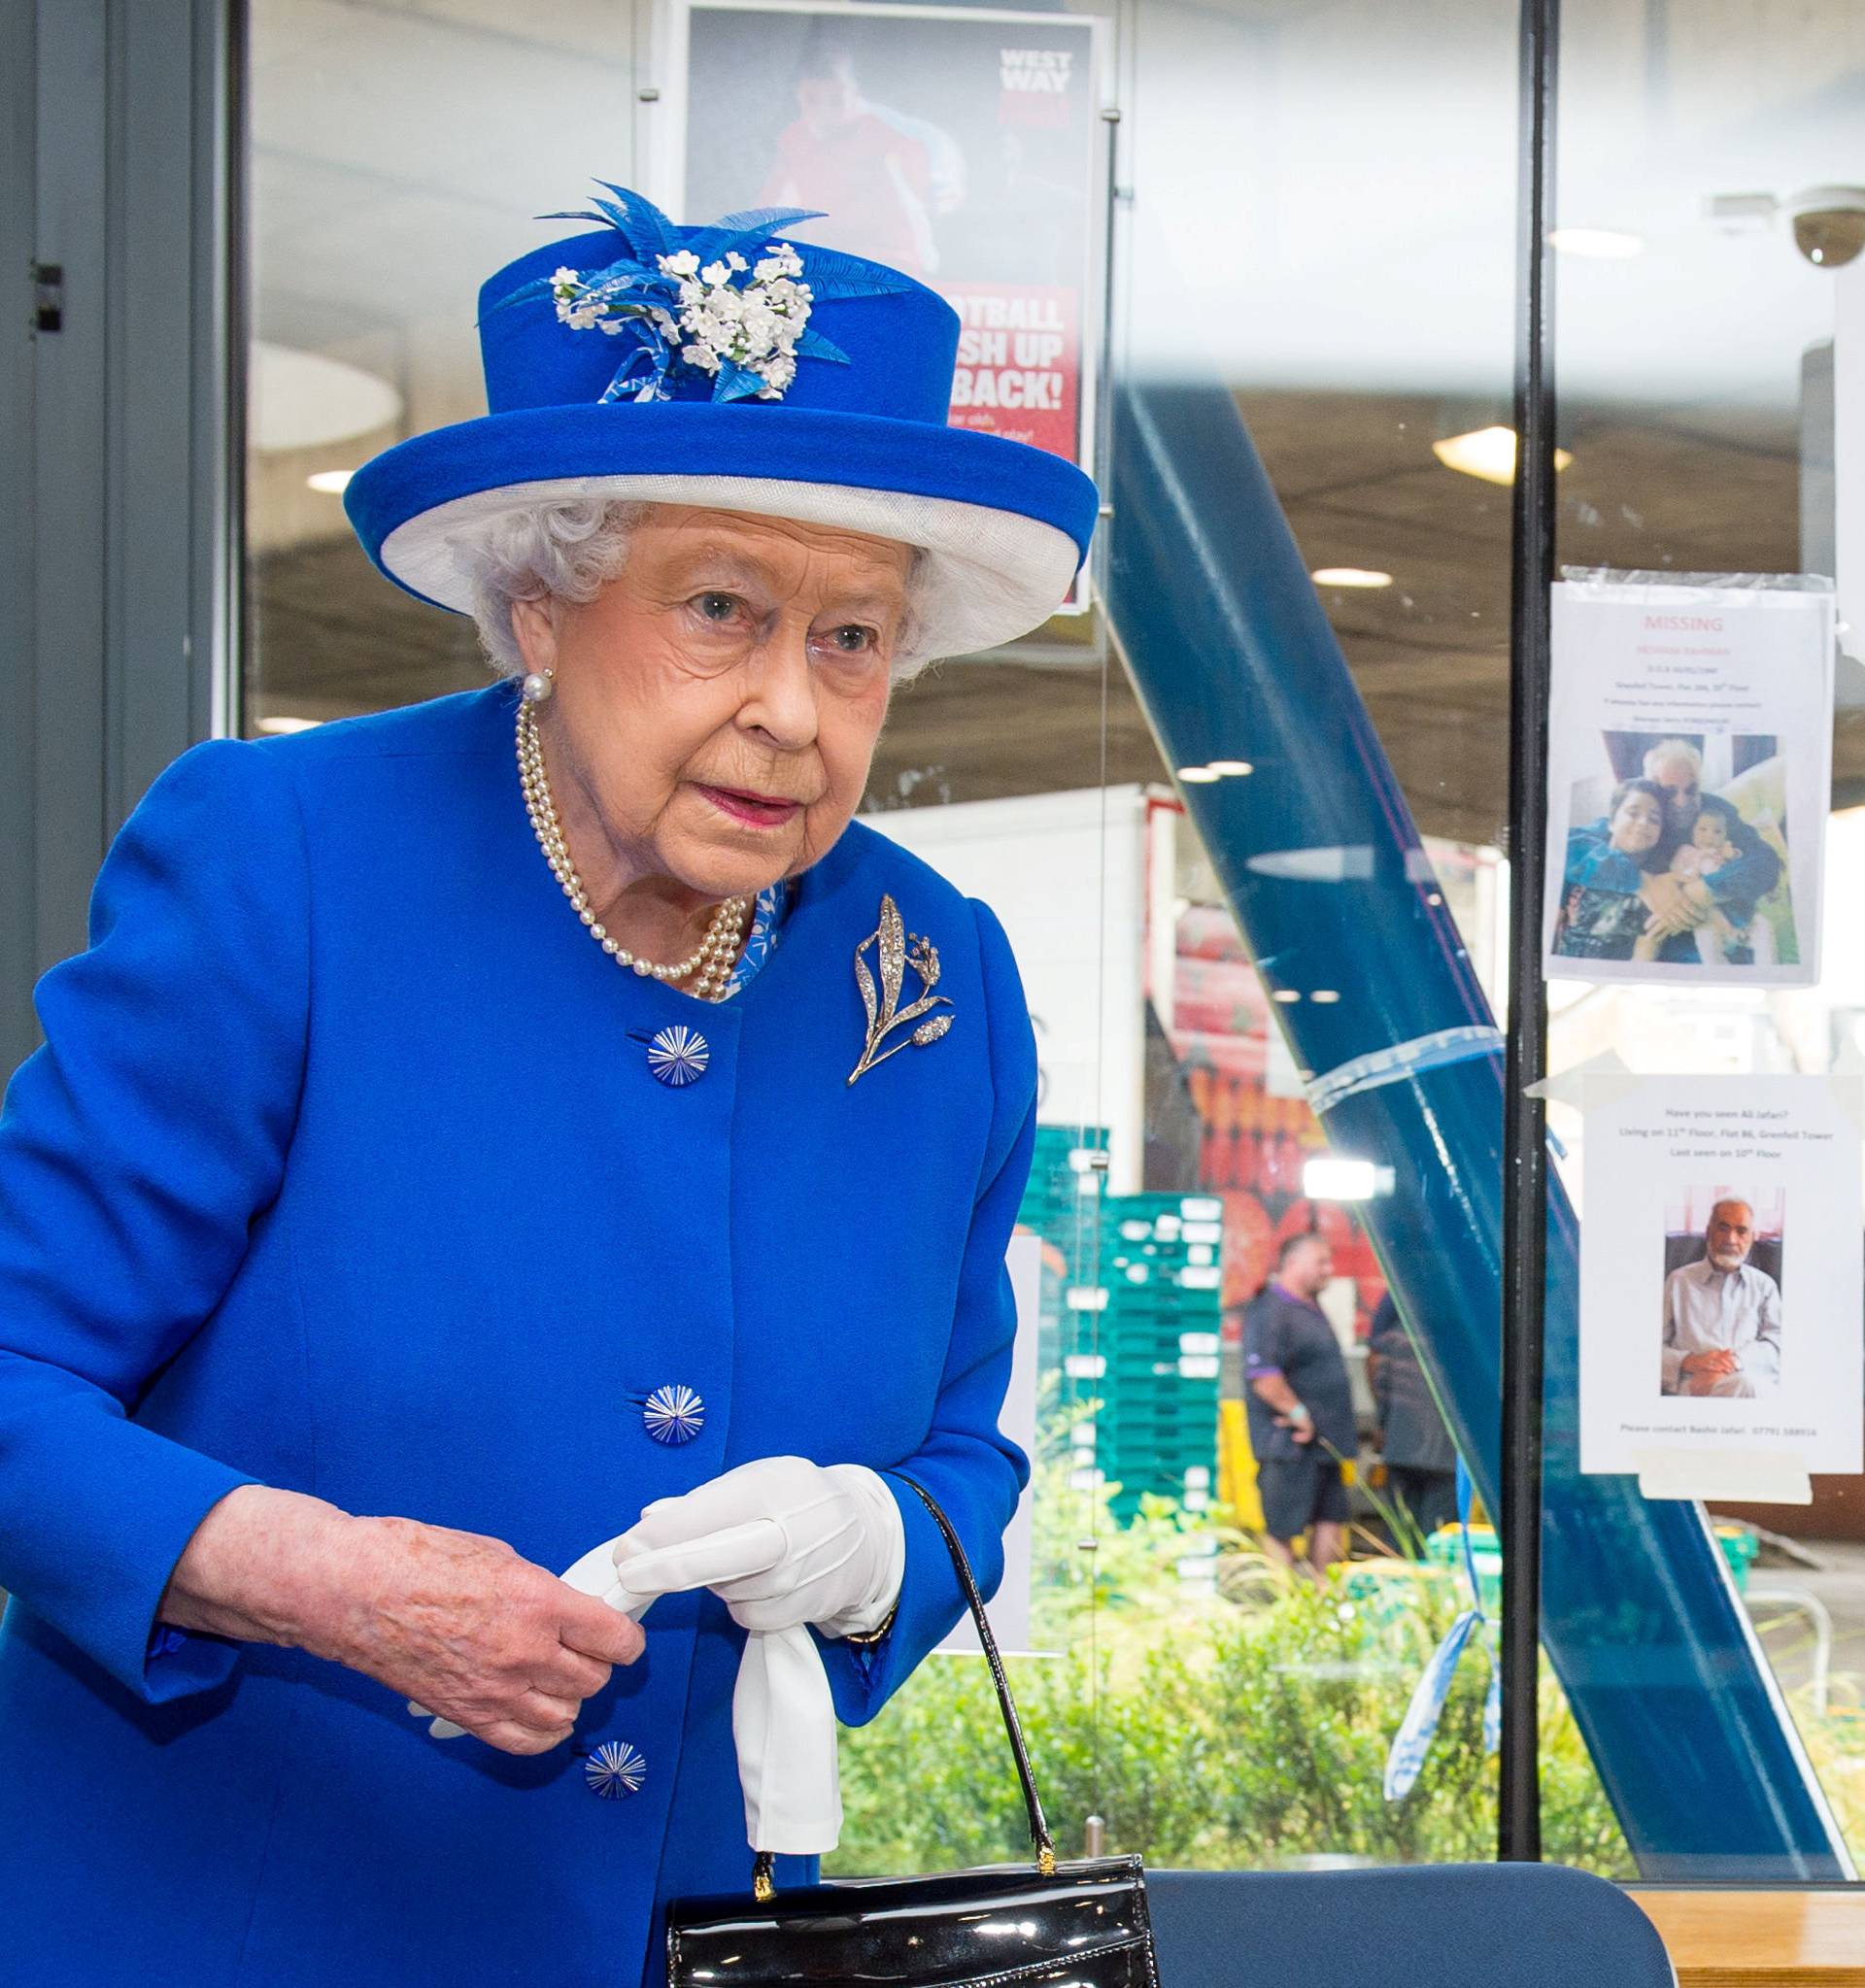 Britain's Queen Elizabeth walks past missing person posters during a visit to the Westway Sports Centre following the fire at the Grenfell Tower block, in north Kensington, West London